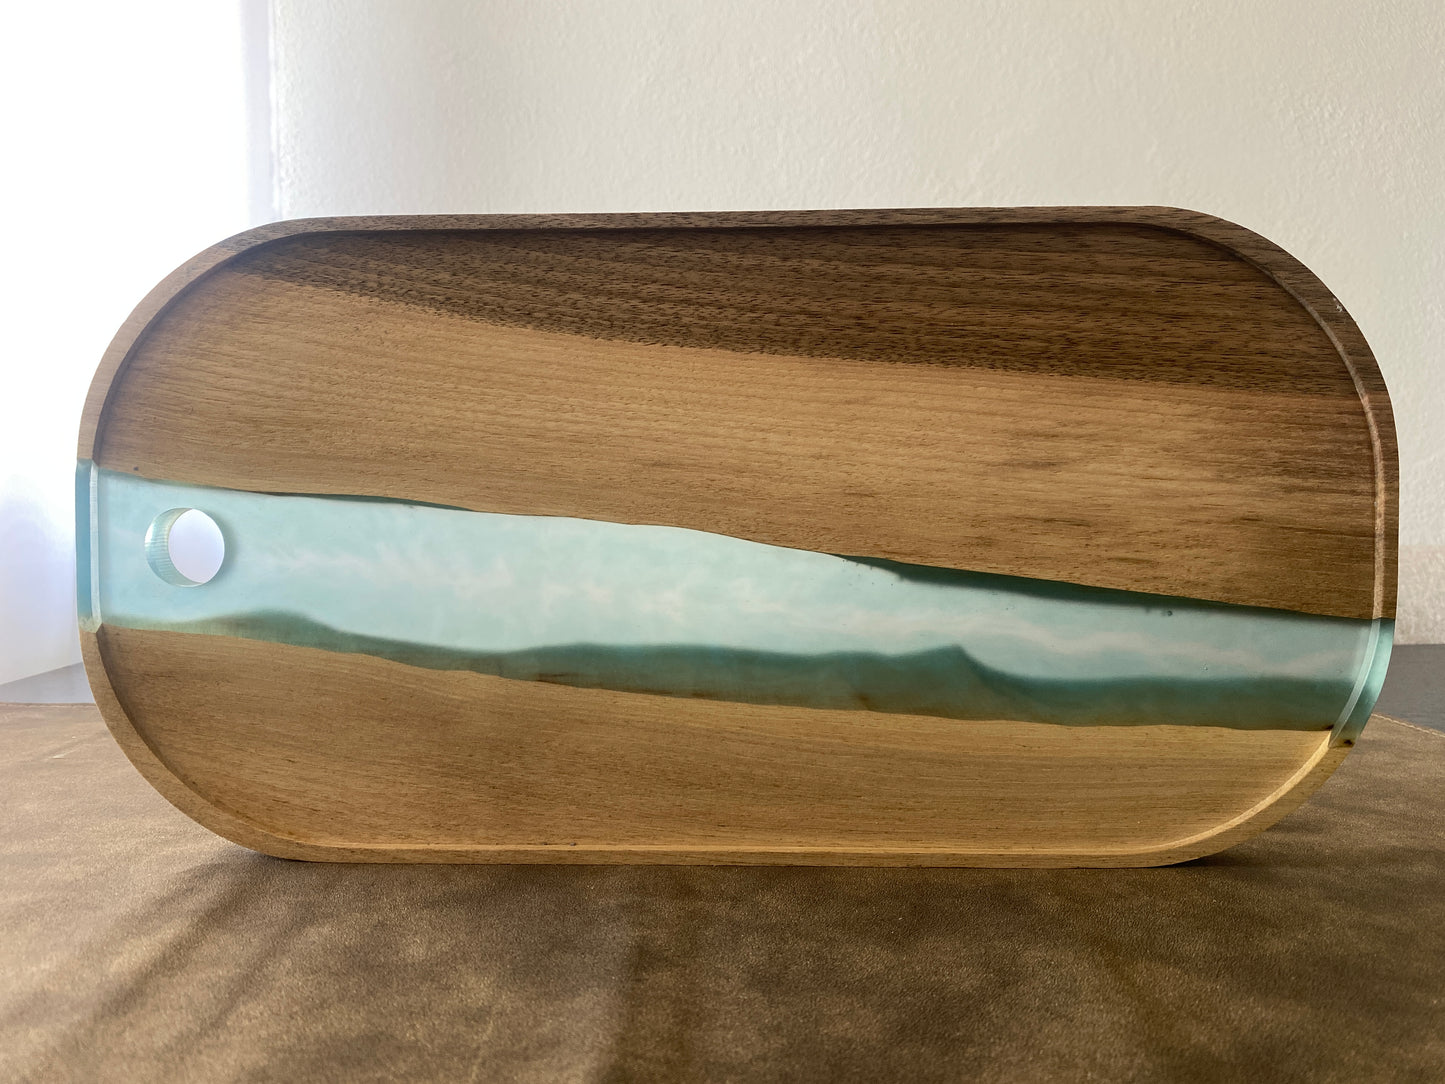 Stylish serving board in turquoise